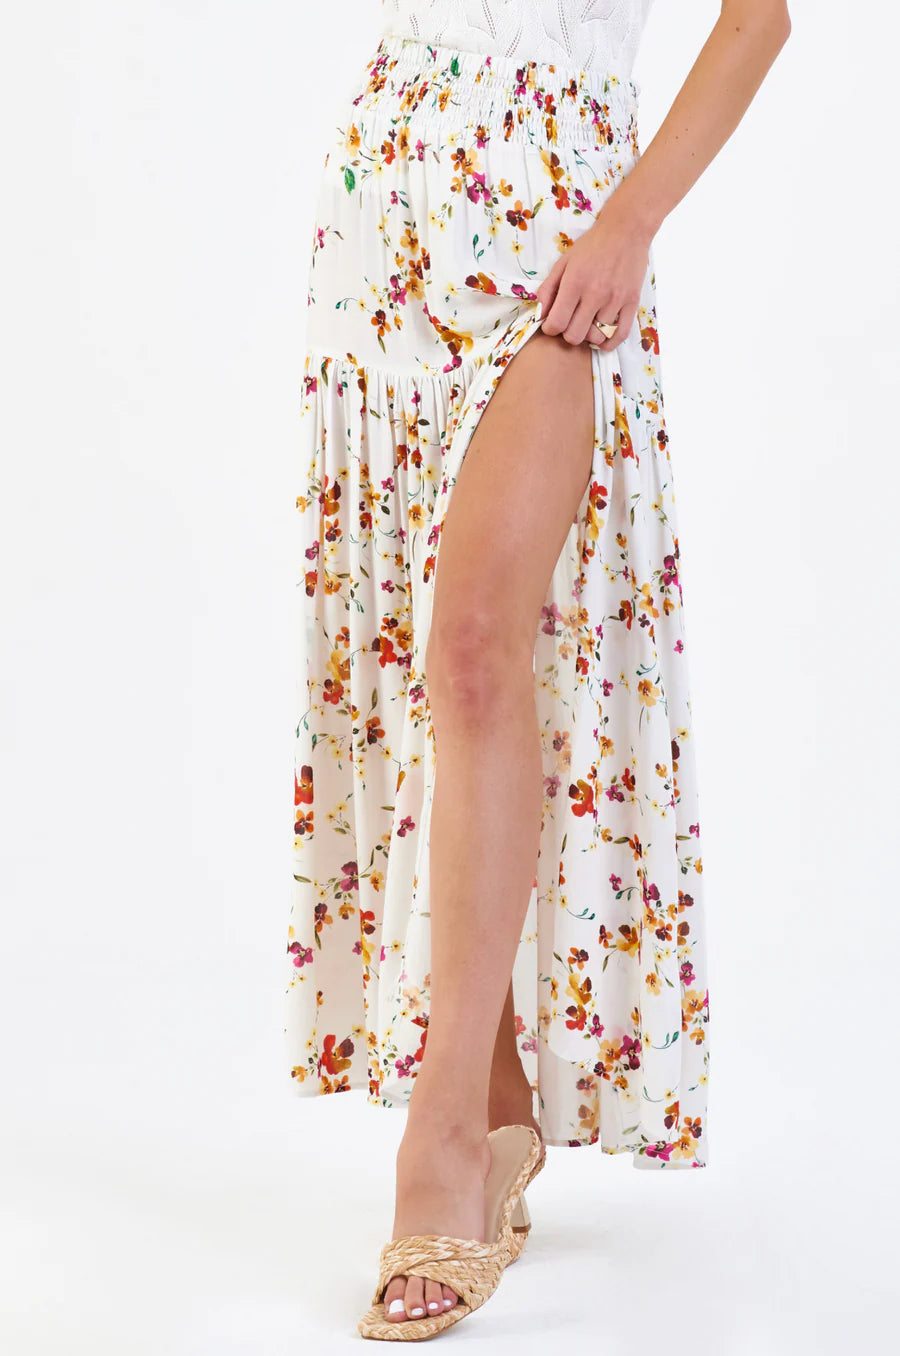 a model wearing a floral maxi skirt and sandals